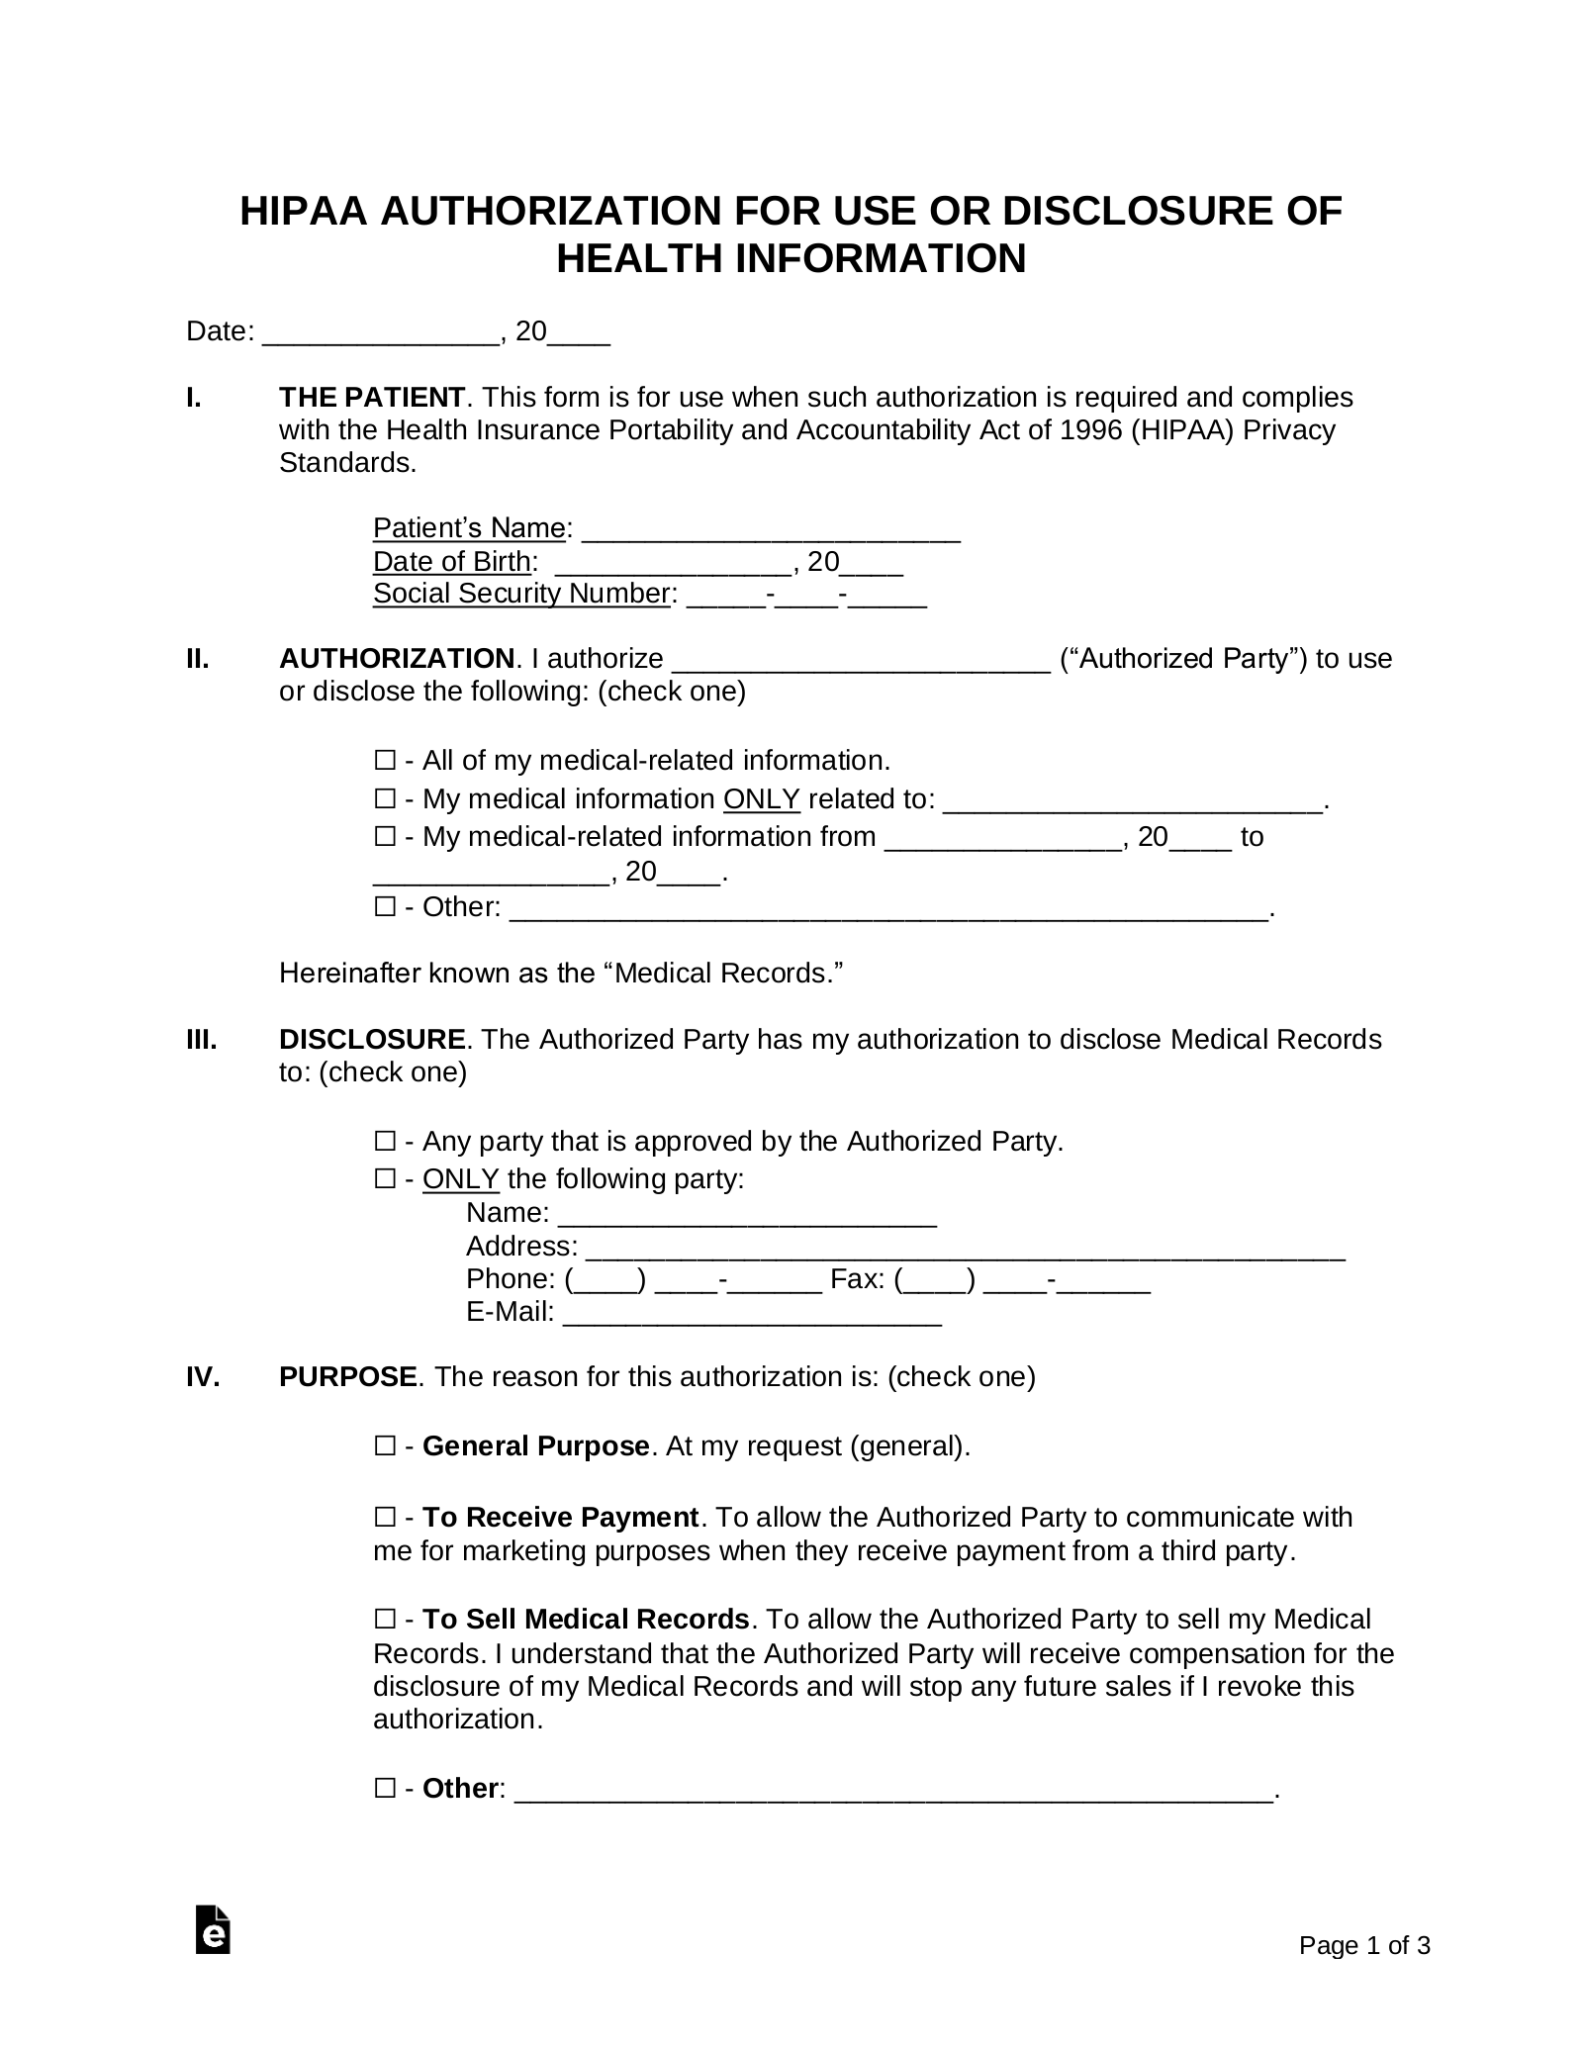 Is There A Standard Hipaa Form